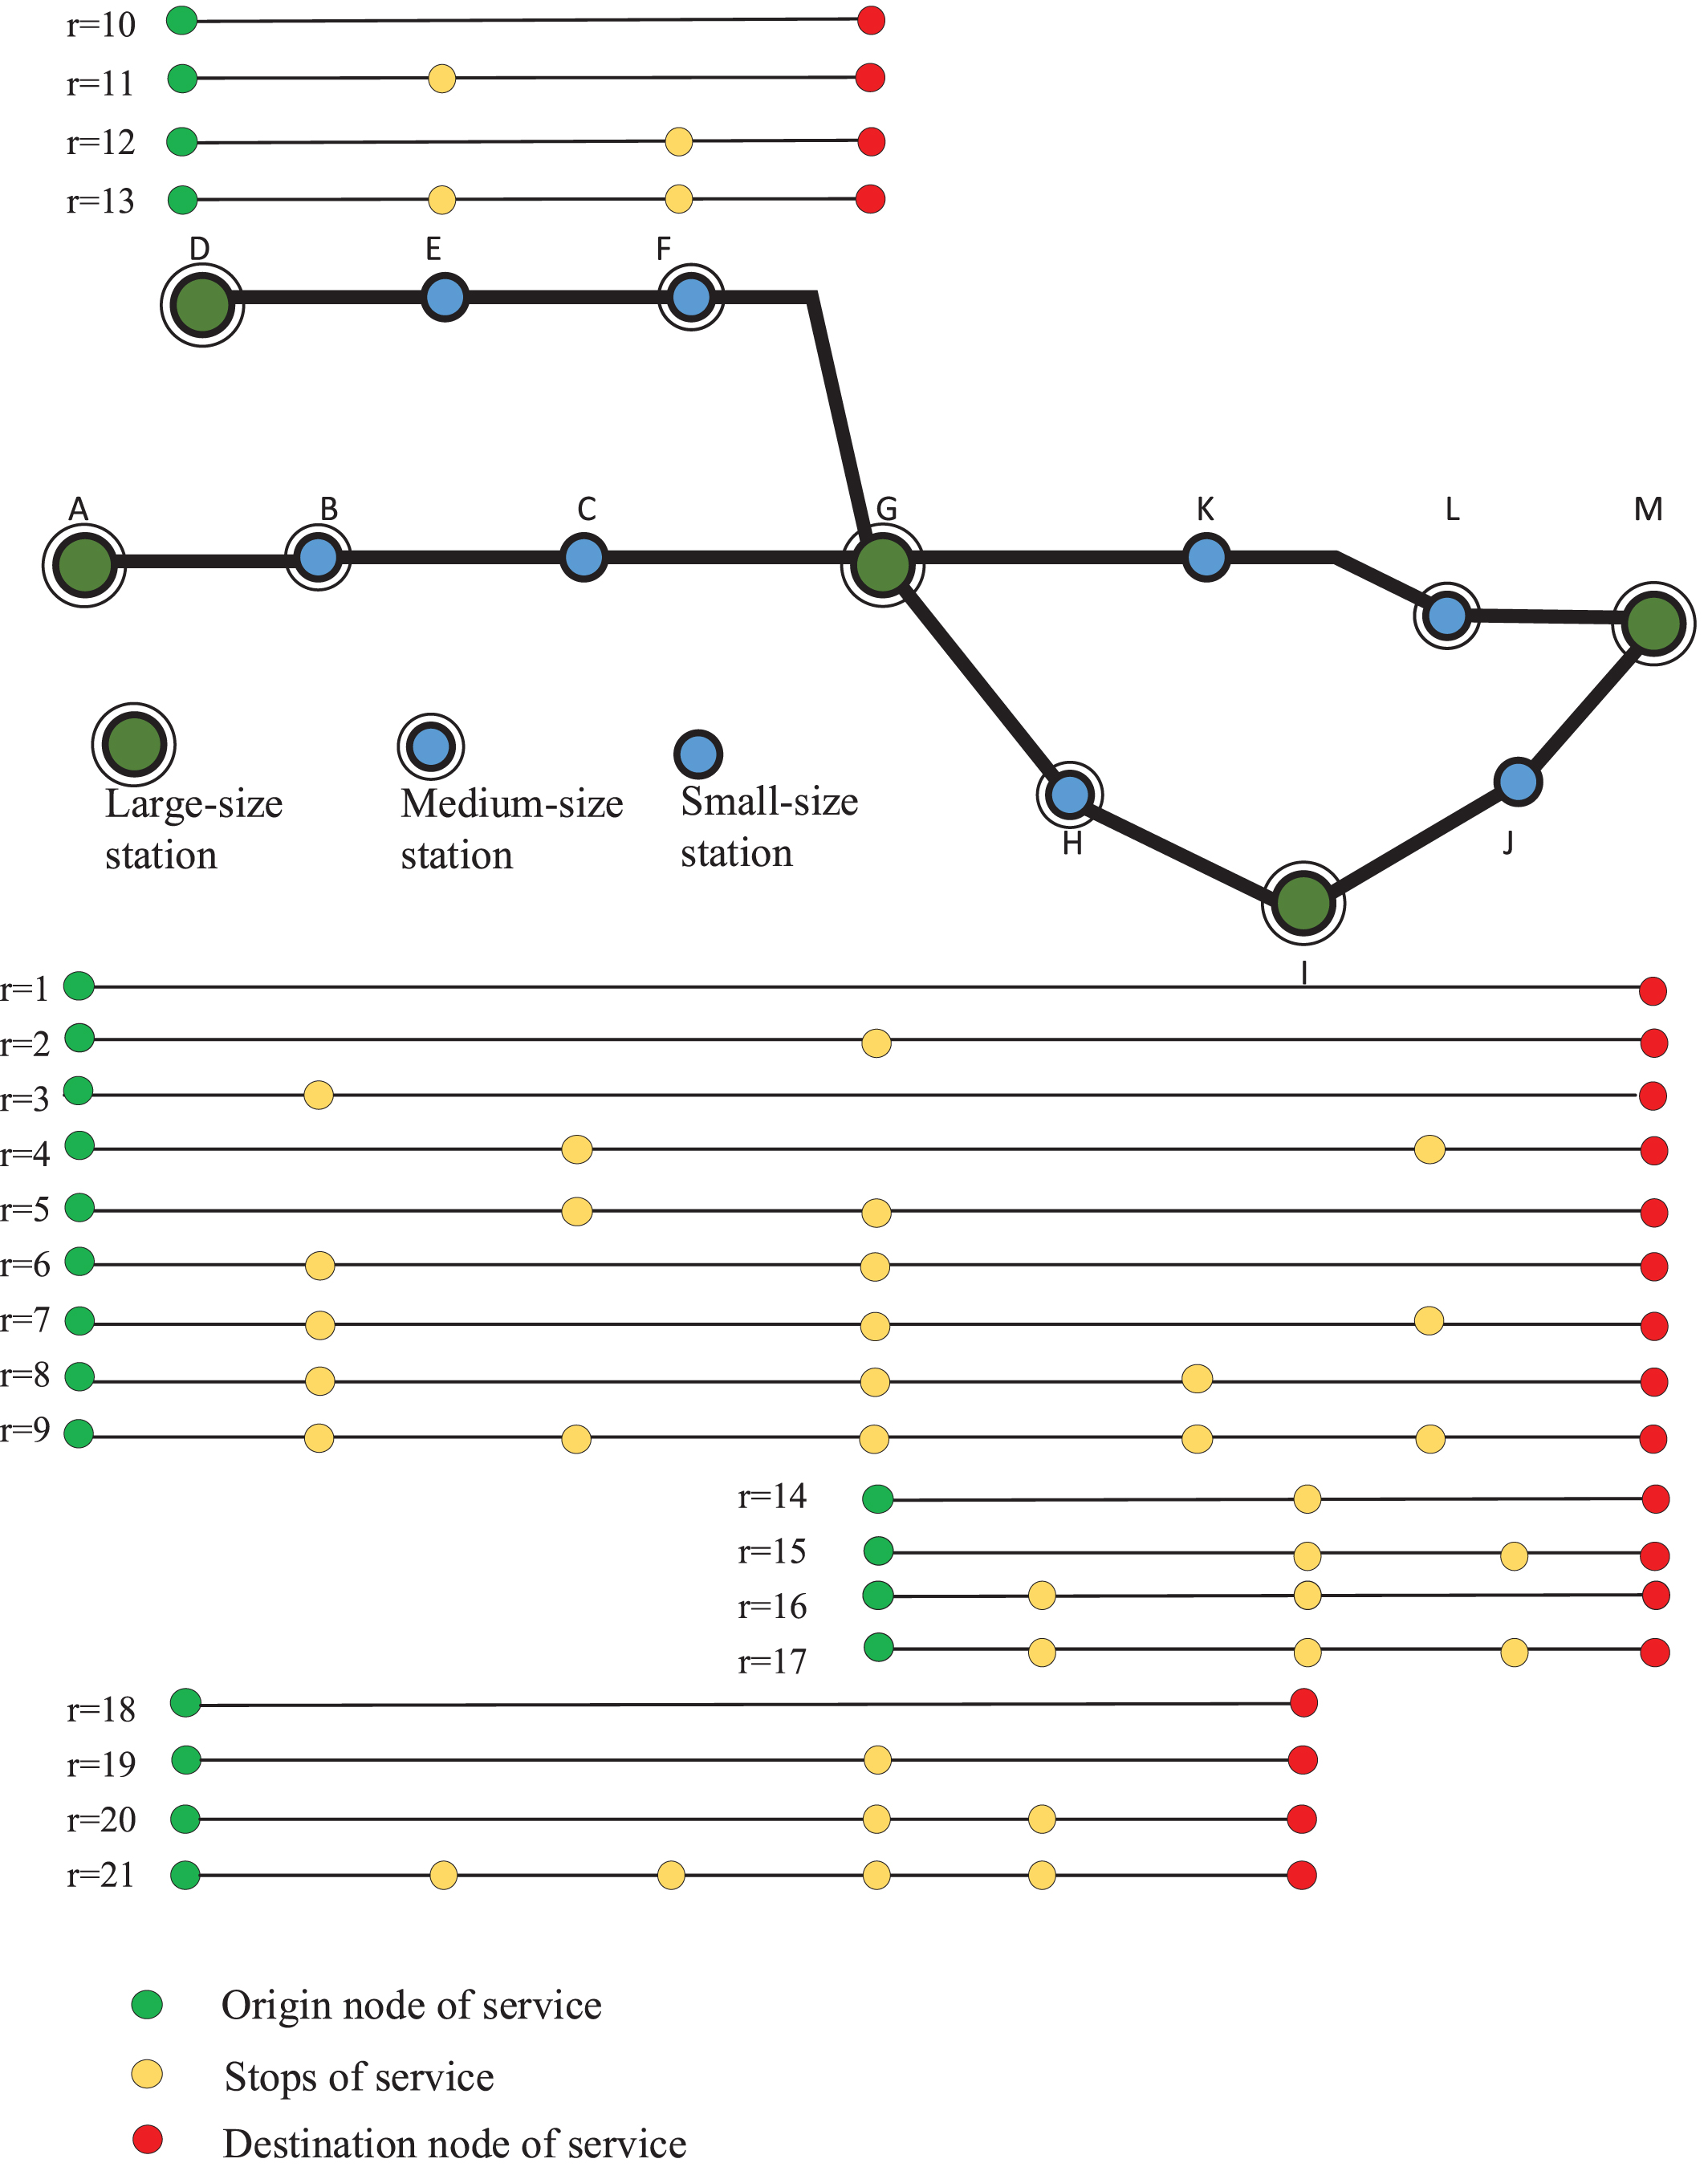 HSR network and pre-given line plan.